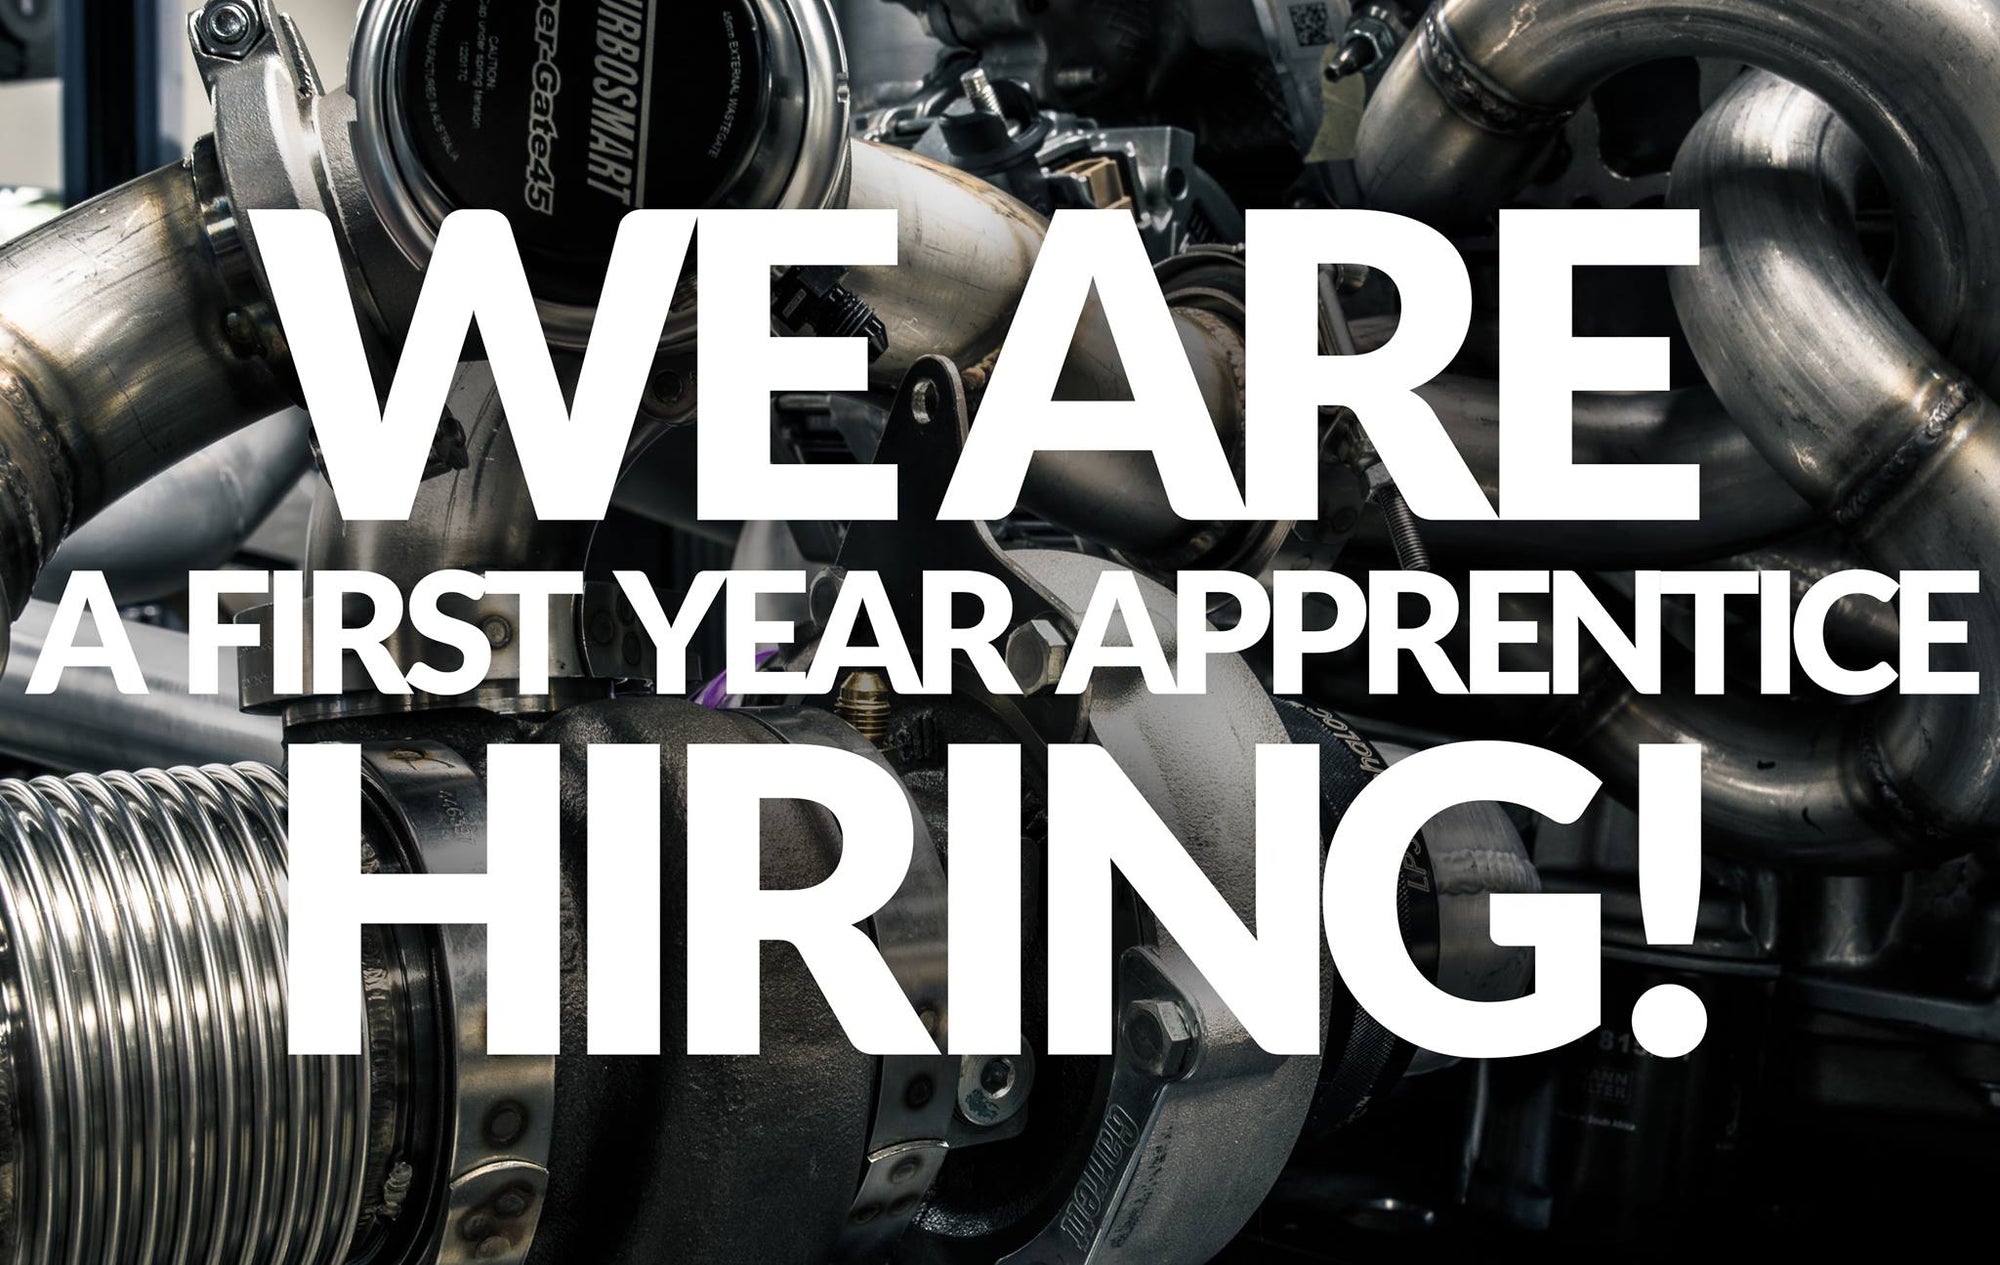 Apprentice Mechanic position available now at PR Technology